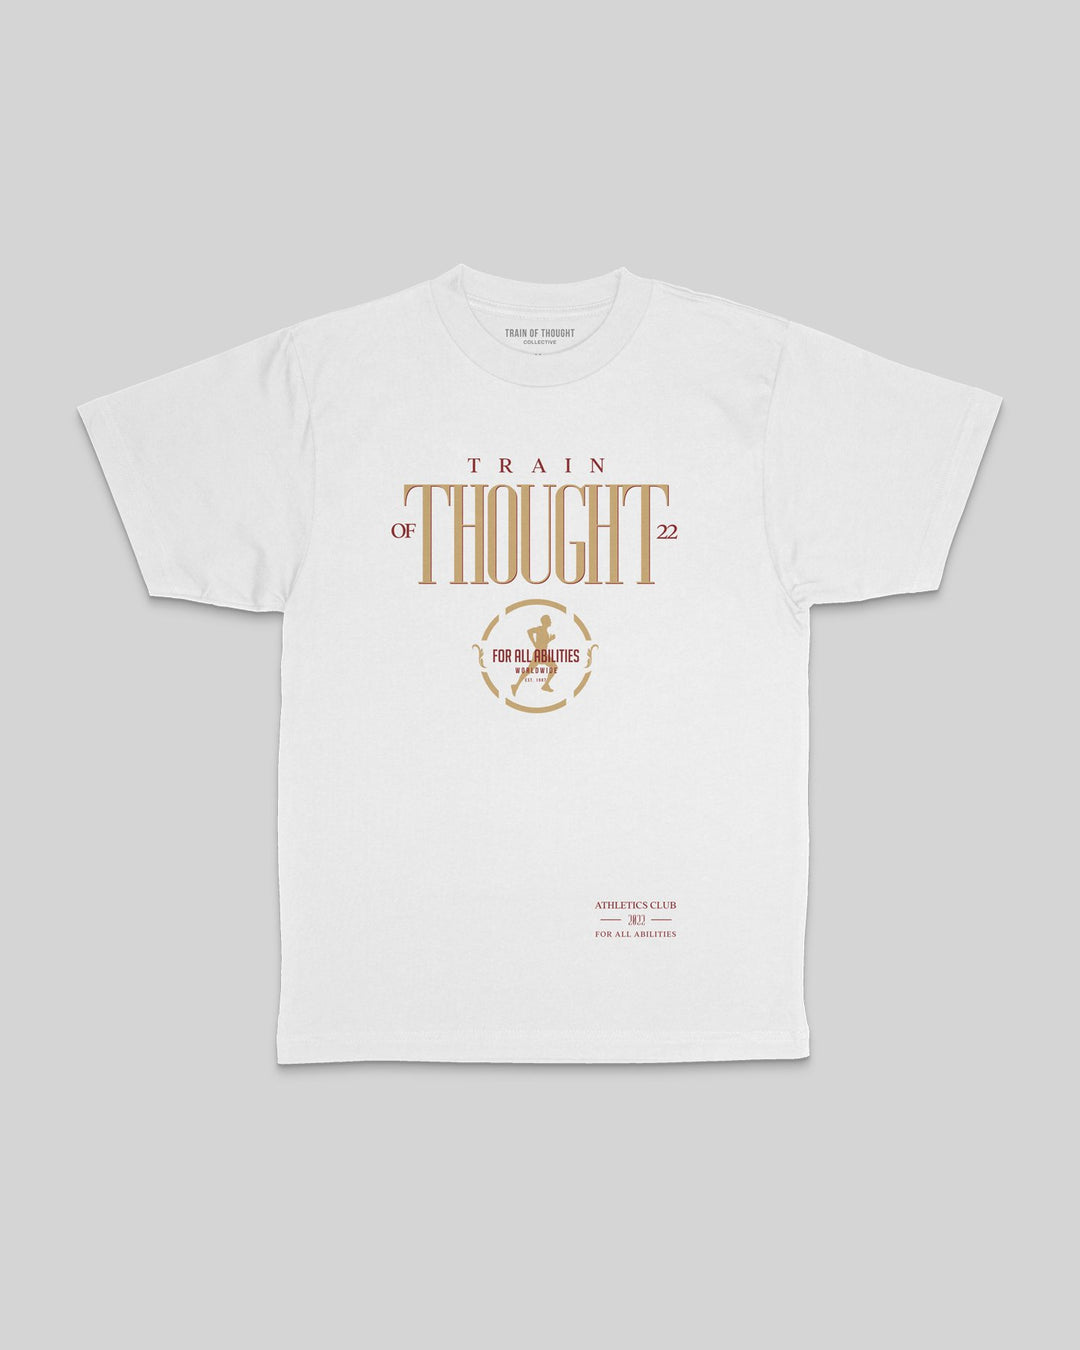 For All Abilities V2 Tee - trainofthoughtcollective